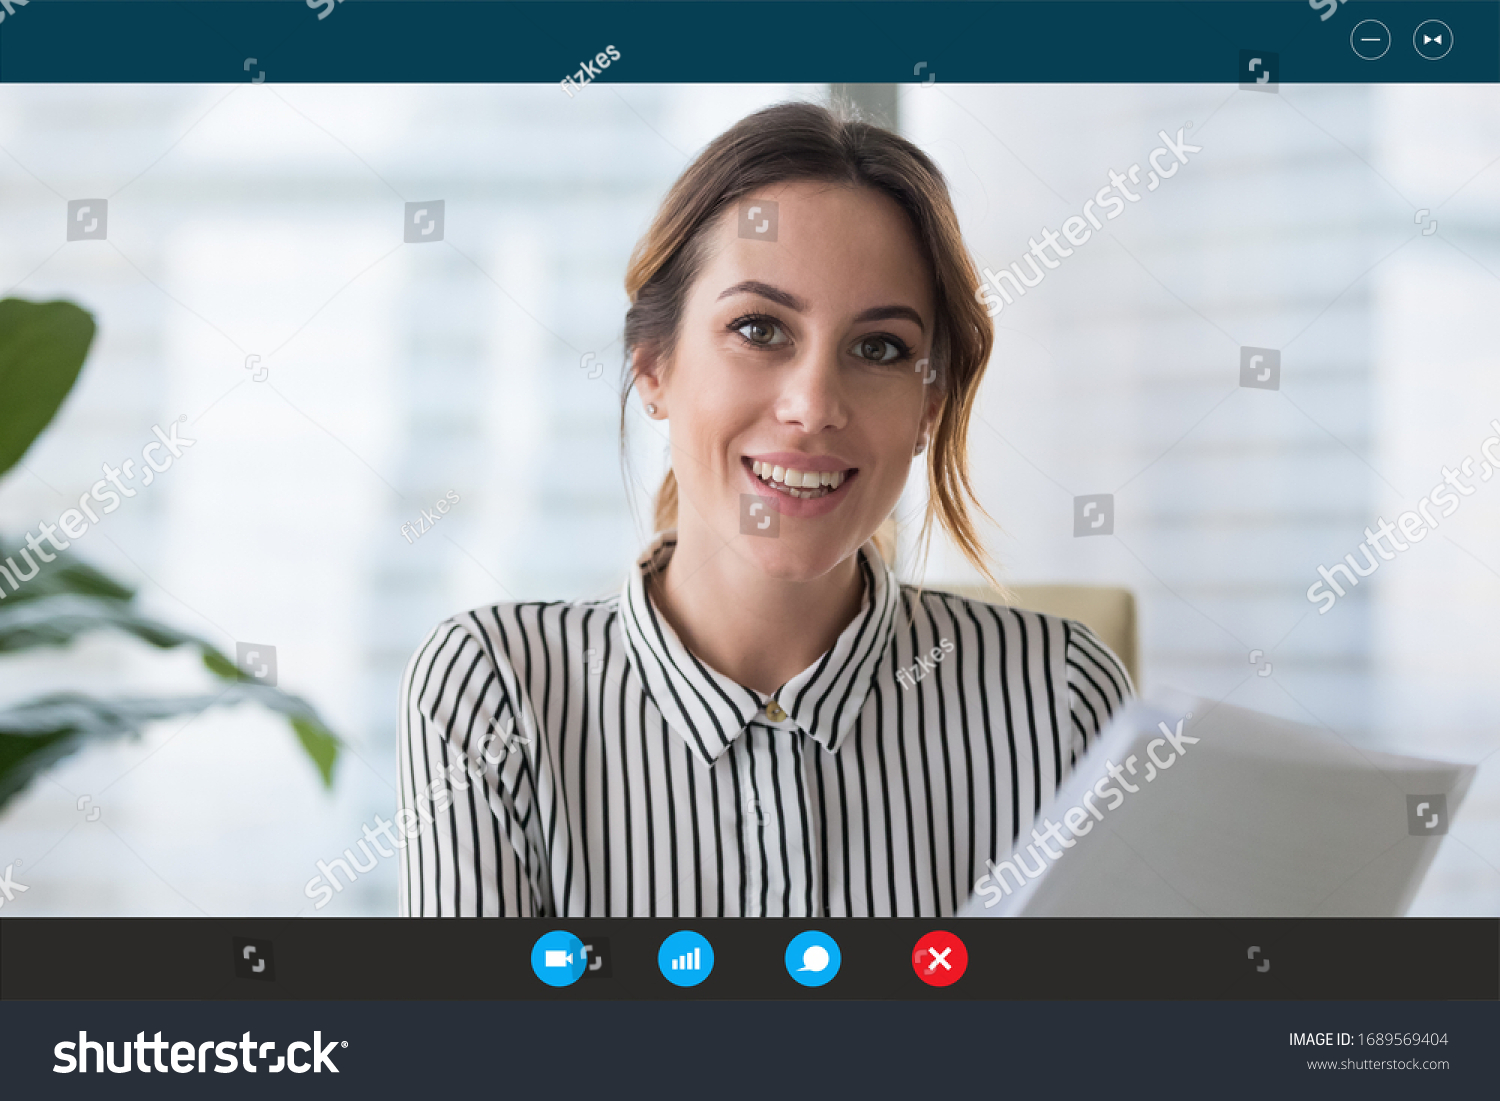 Headshot portrait screen view of young businesswoman consult client online using Webcam conference, smiling female employee speak talk on video call with partner or colleague from home office #1689569404